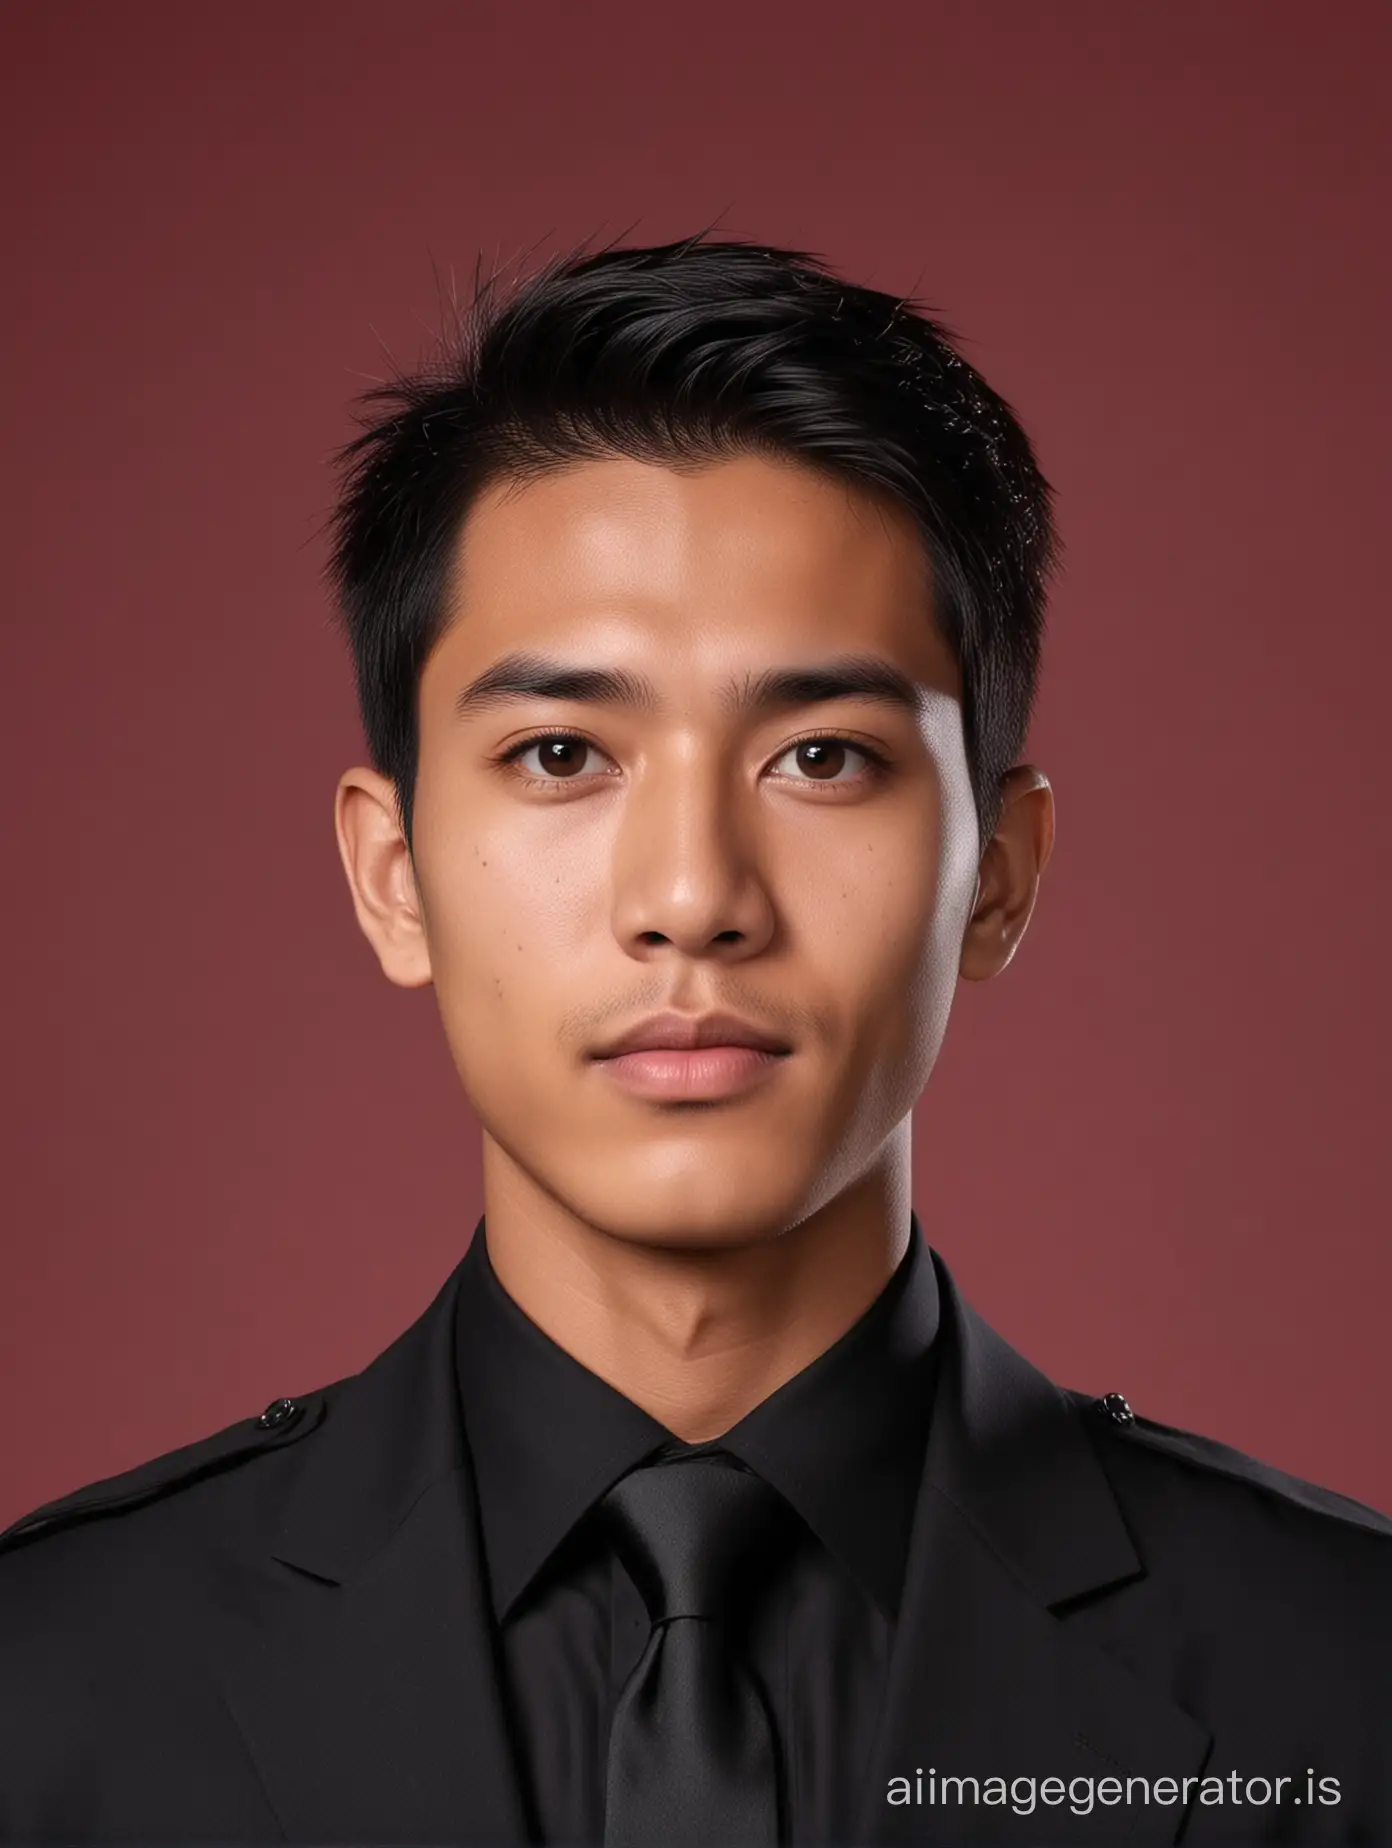 An Indonesian young man, age 21 years old. Wearing black sut and black tie for photo shot passport photo. Black short and thin hair, like army style. Background red.Body and Face facing the camera. 8K, UHD